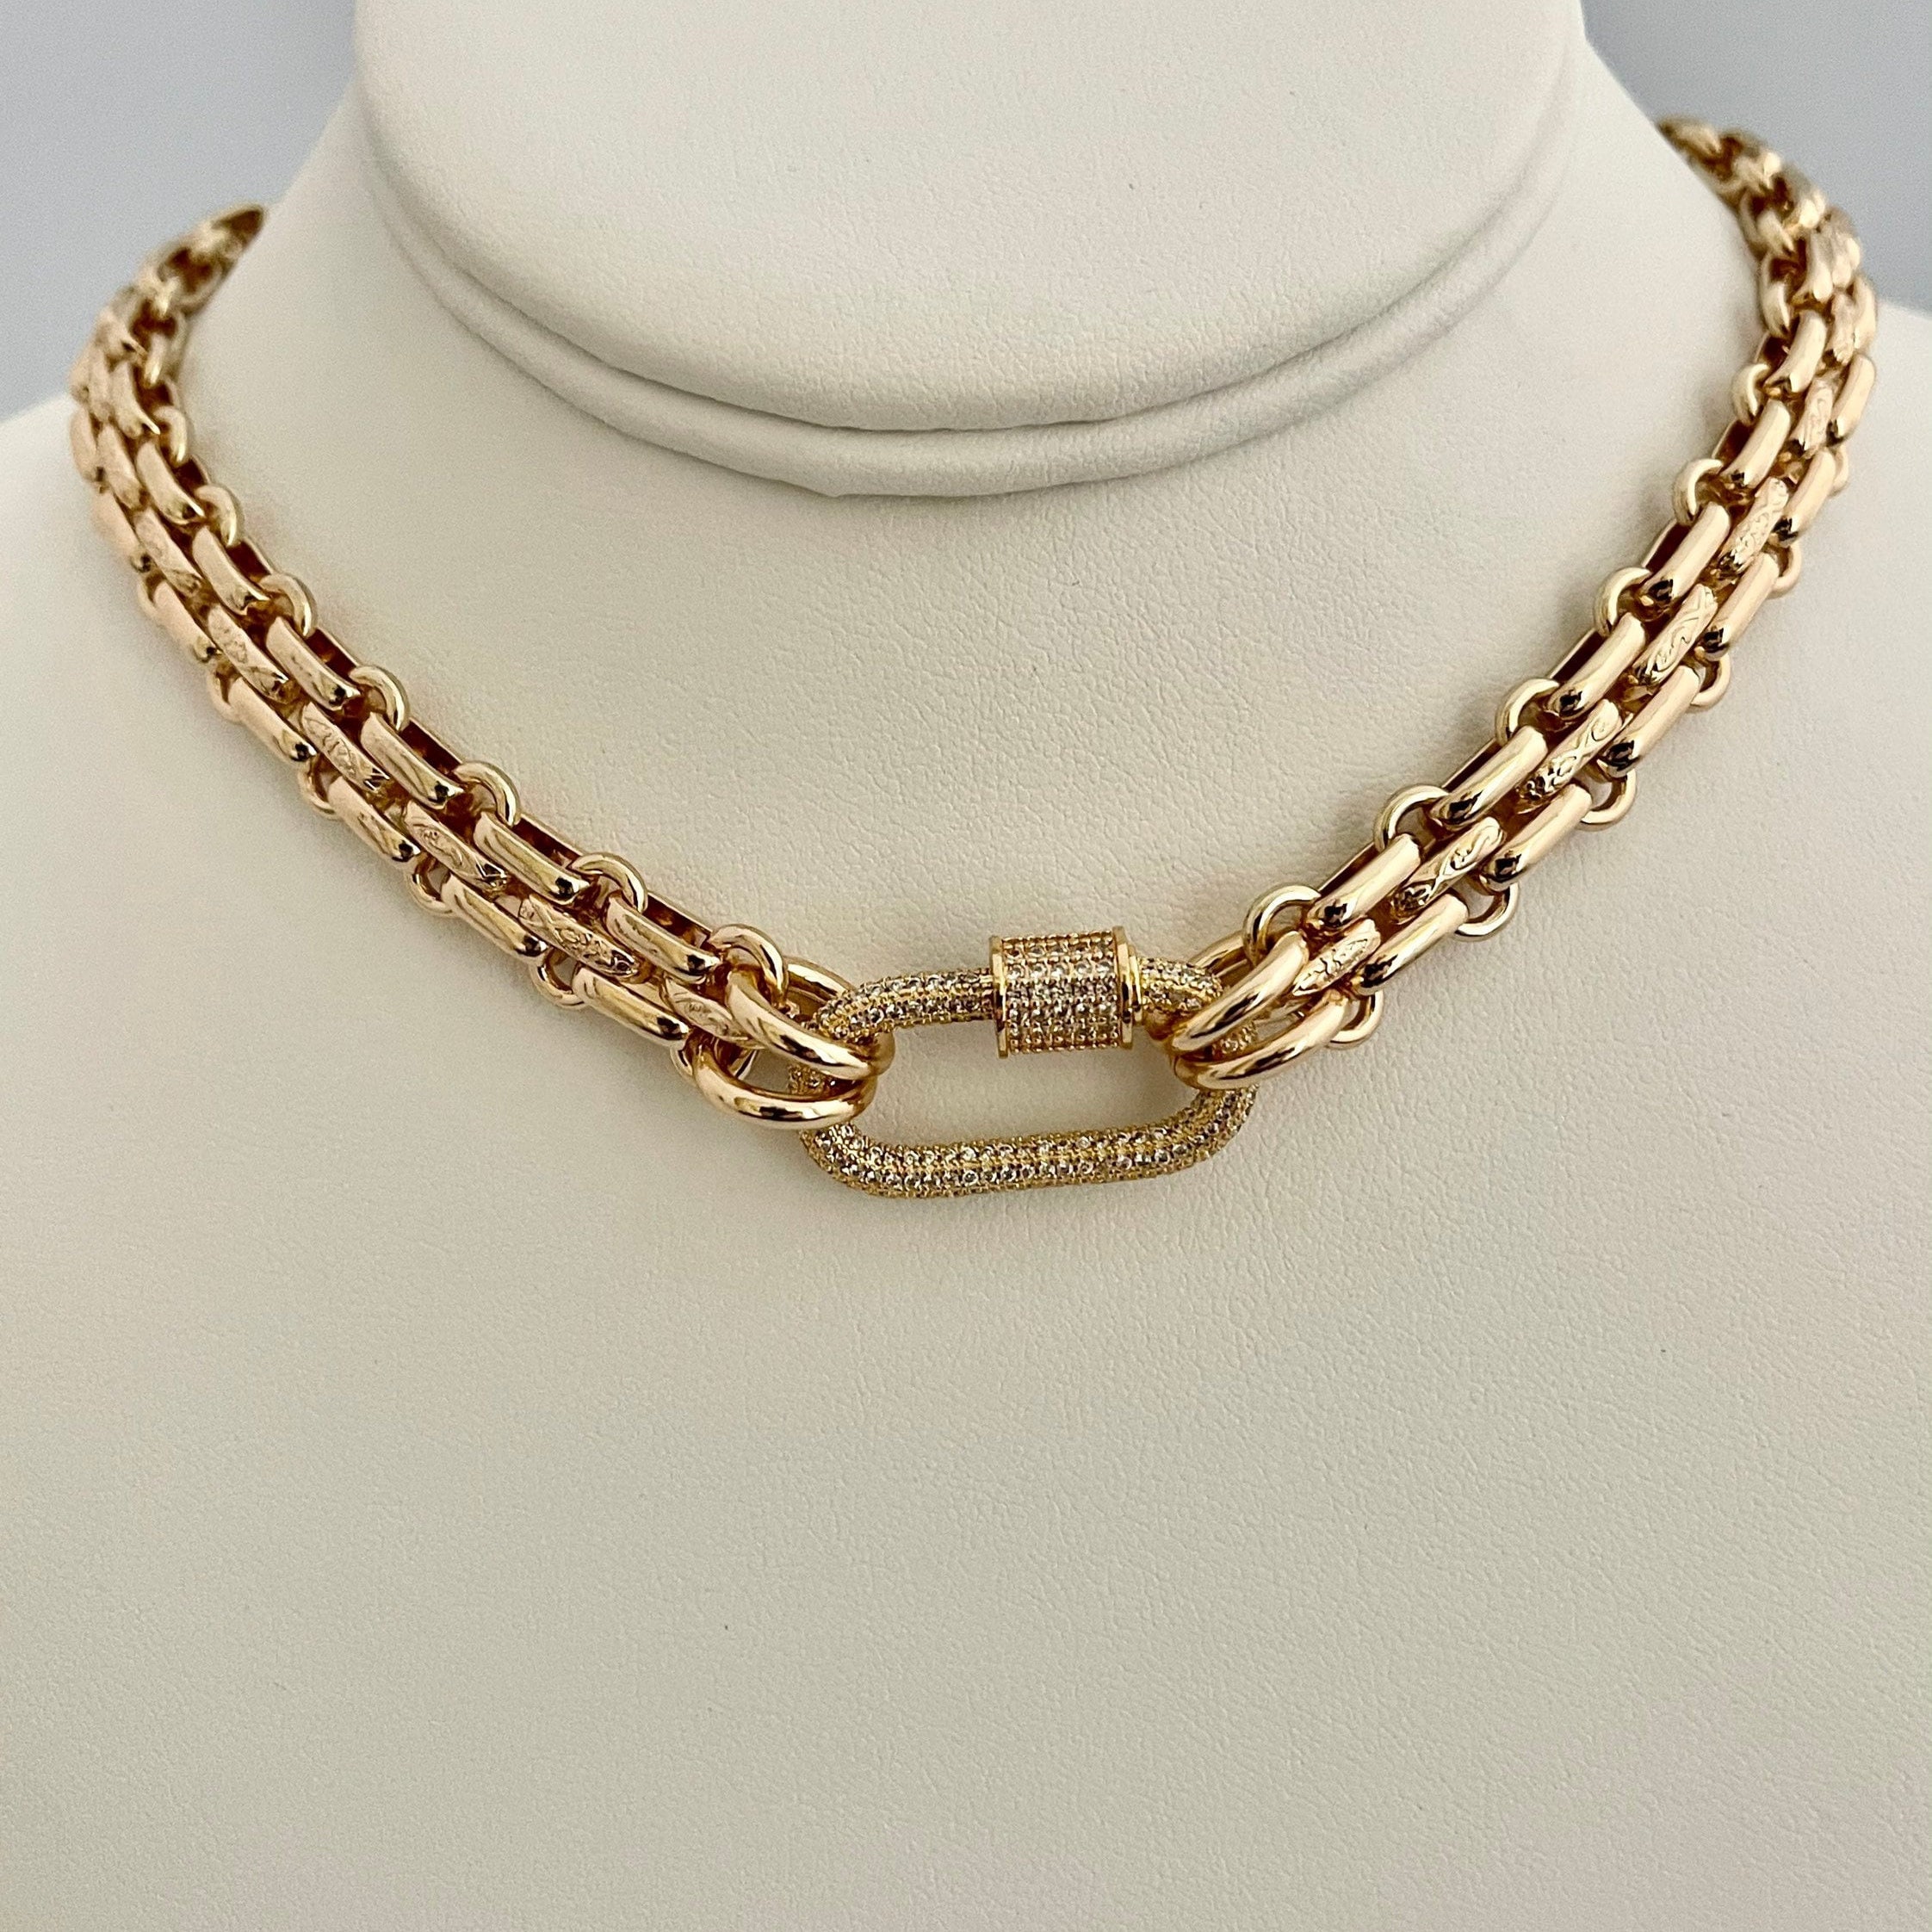 Gold Carabiner Necklace-Chunky Gold Cable Chain-Pave Carabiner Clasp 23